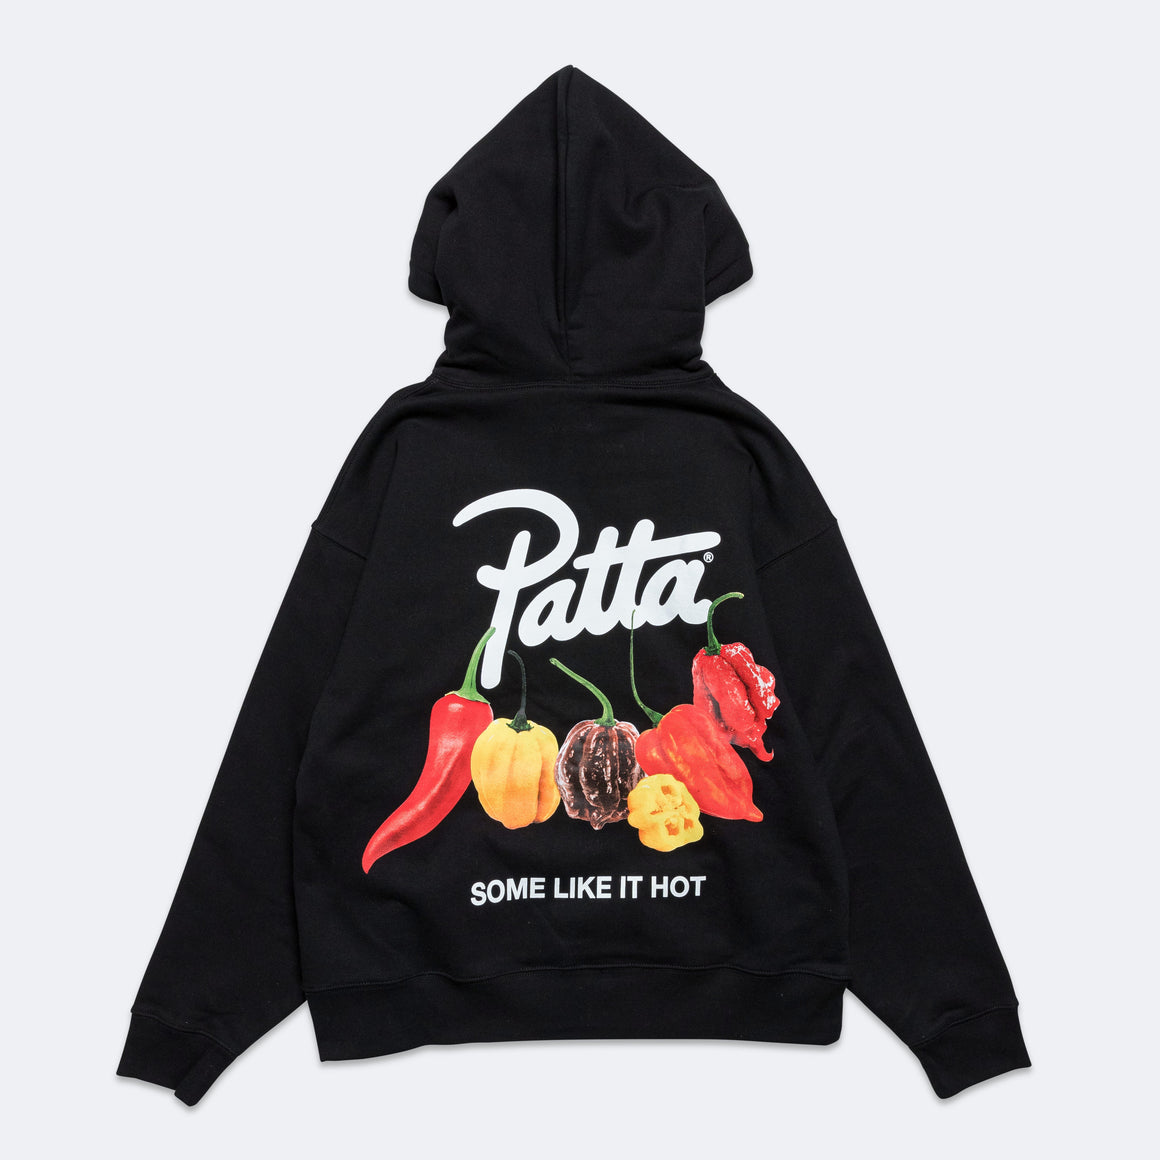 Patta - 'Some Like It Hot' Boxy Hooded Sweater - Black - UP THERE